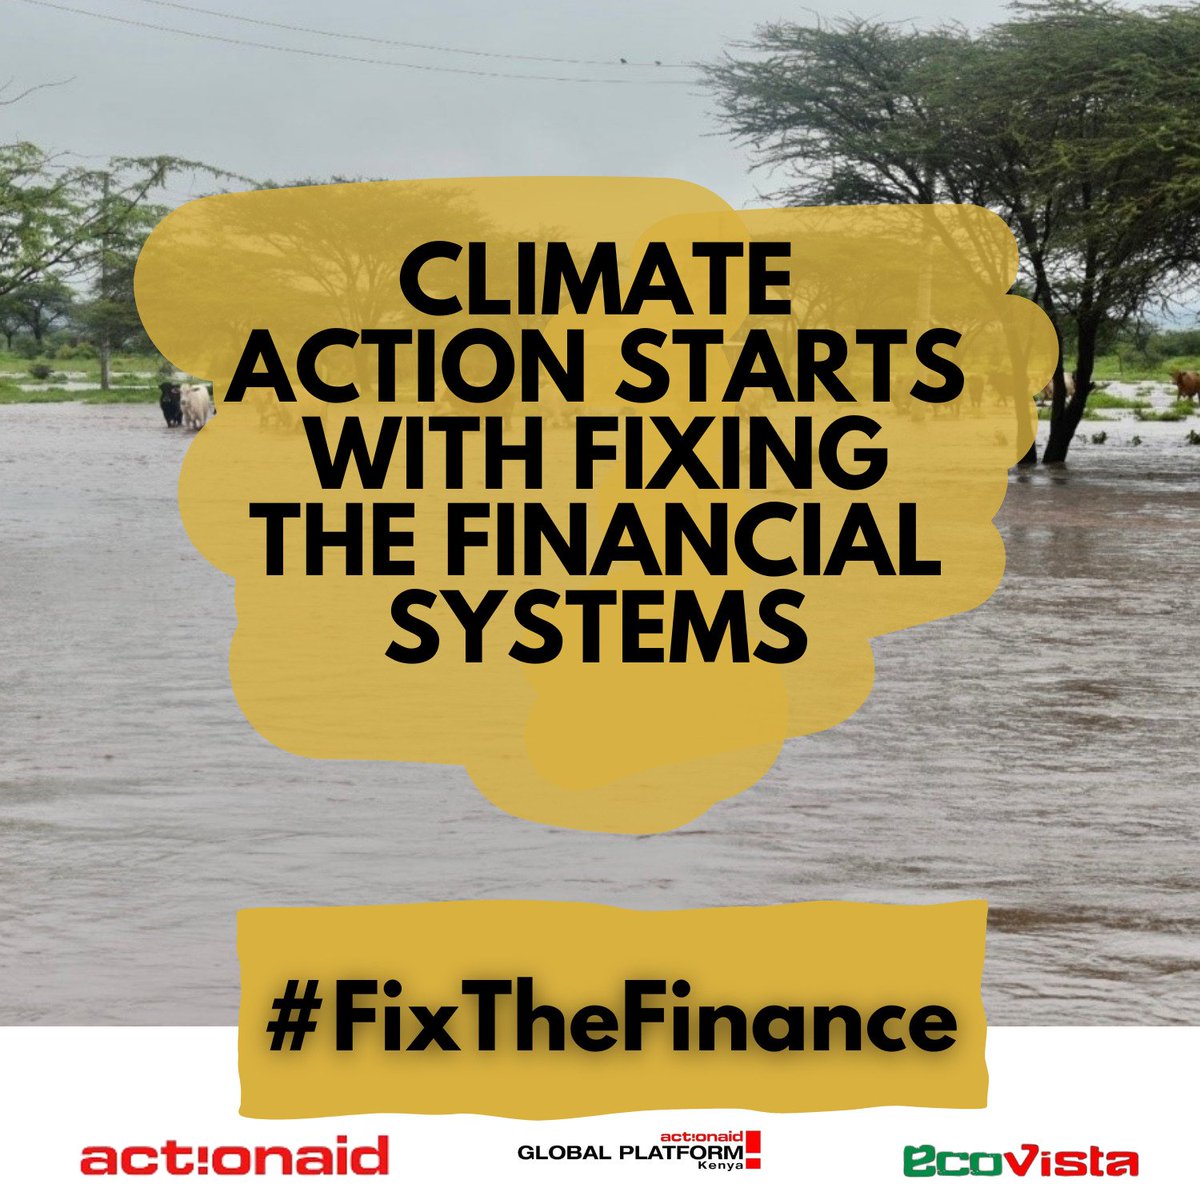 Governments and Financial institutions must be deliberate on freeing up the climate finance to support climate friendly investments and be intentional in promoting equitable and sustainable economies. #FixTheFinance #EndFossilFuels #ClimateActionNow